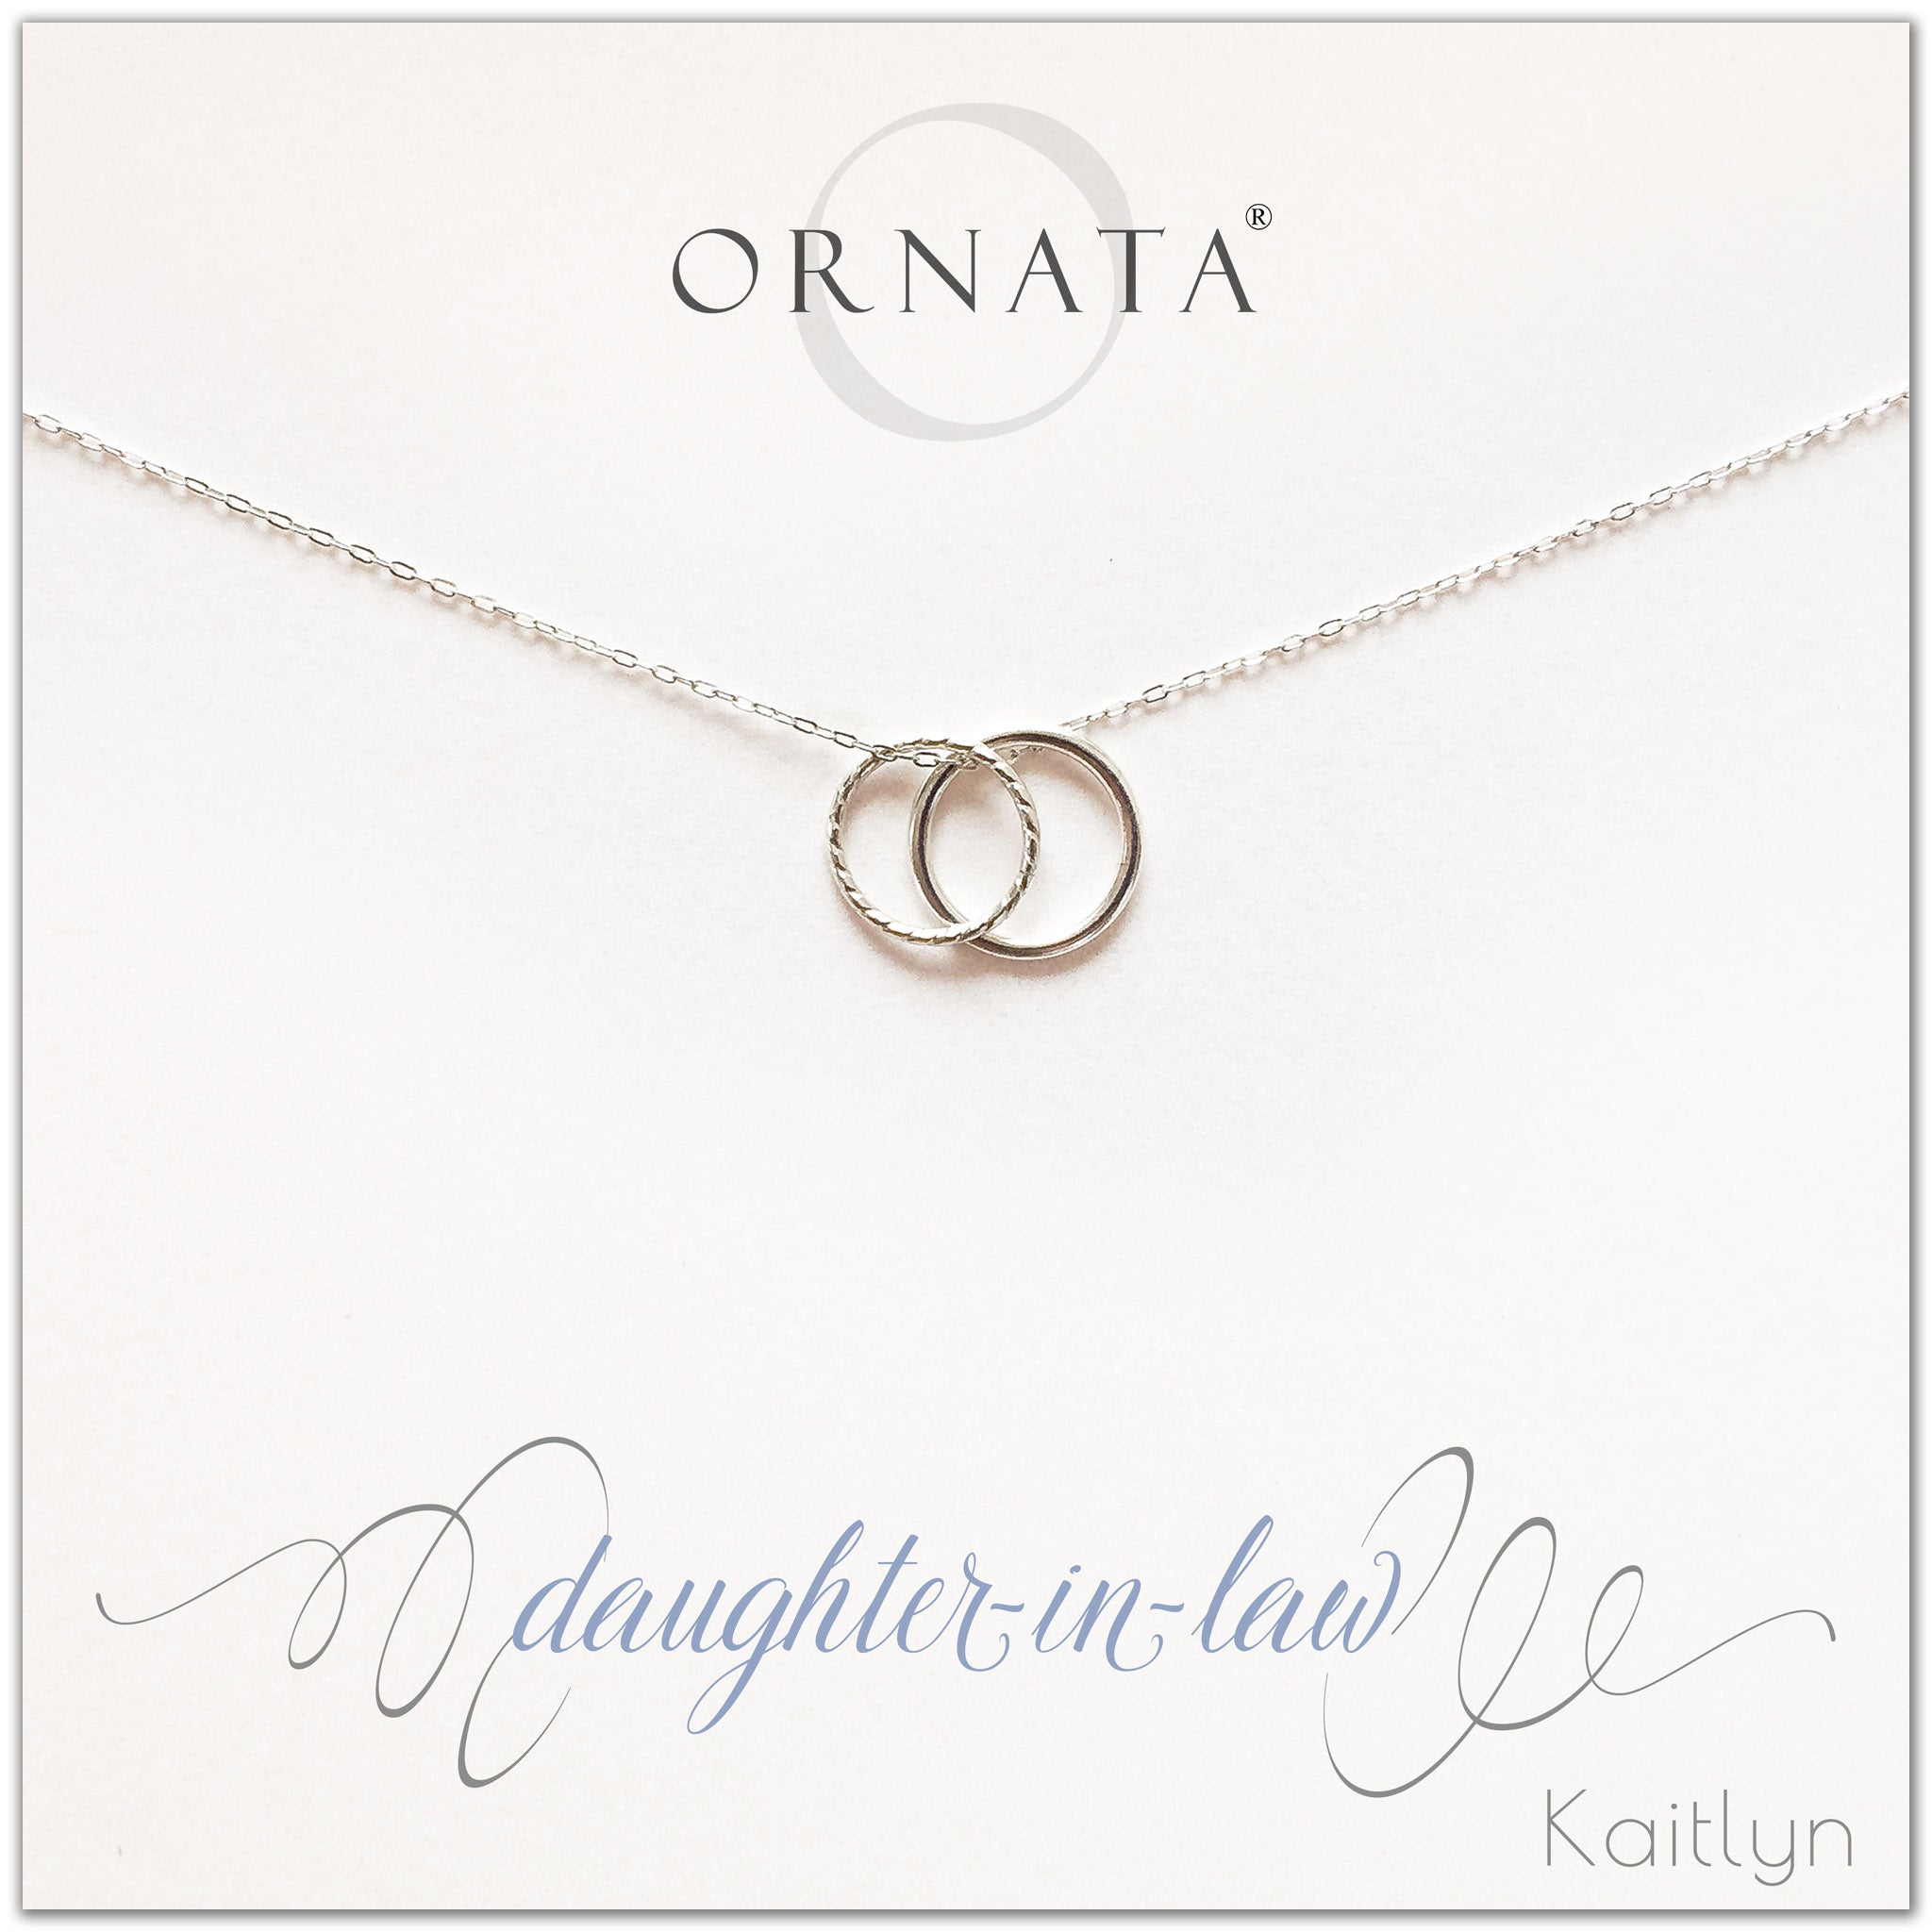 Daughter in law necklace - personalized silver necklaces. Our sterling silver custom jewelry is a perfect gift for daughters in law from mothers in law or fathers in law. Also a good gift for Mother’s Day. Part of our Generations Jewelry collection. 